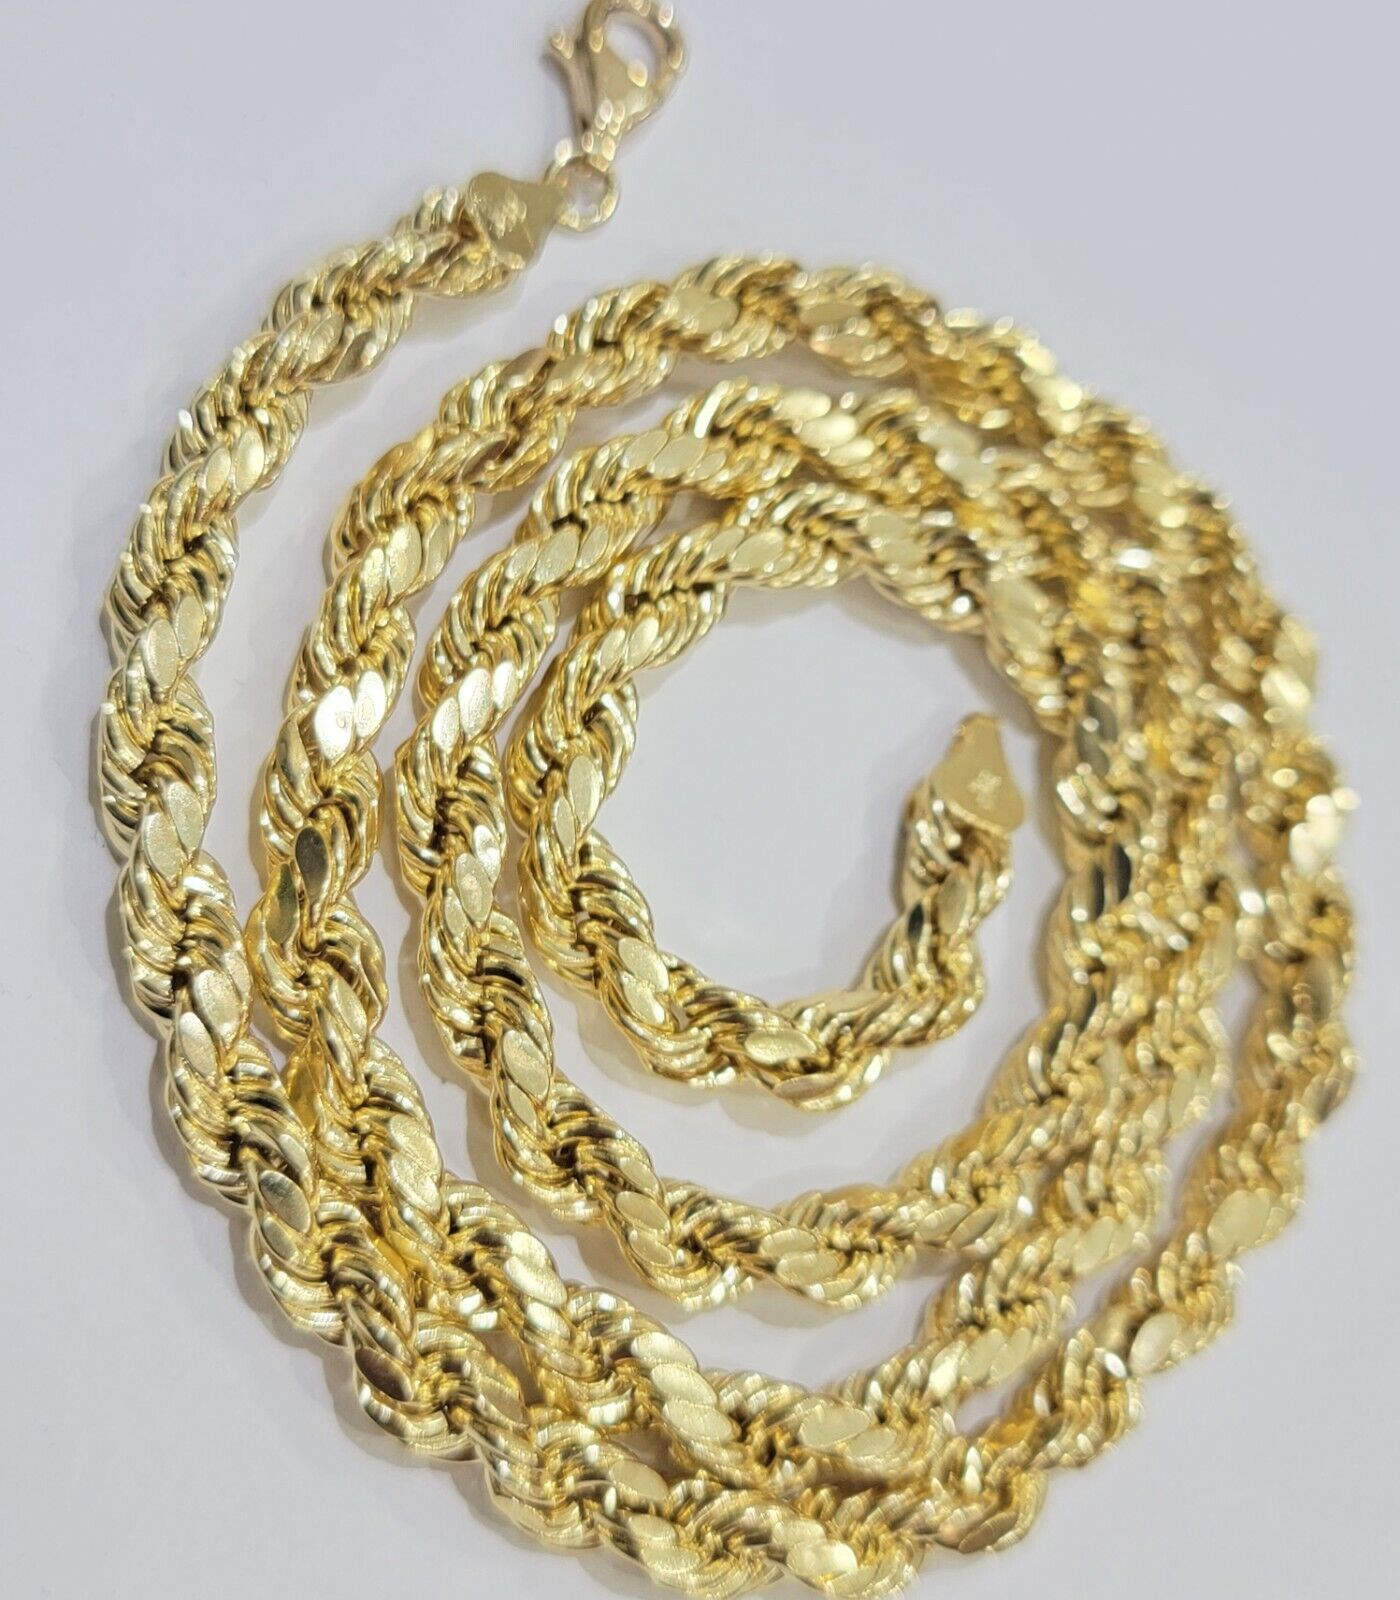 Real 10k SOLID Gold Rope Chain For Men 24 Inch 8mm On Sale Free Shipping THICK